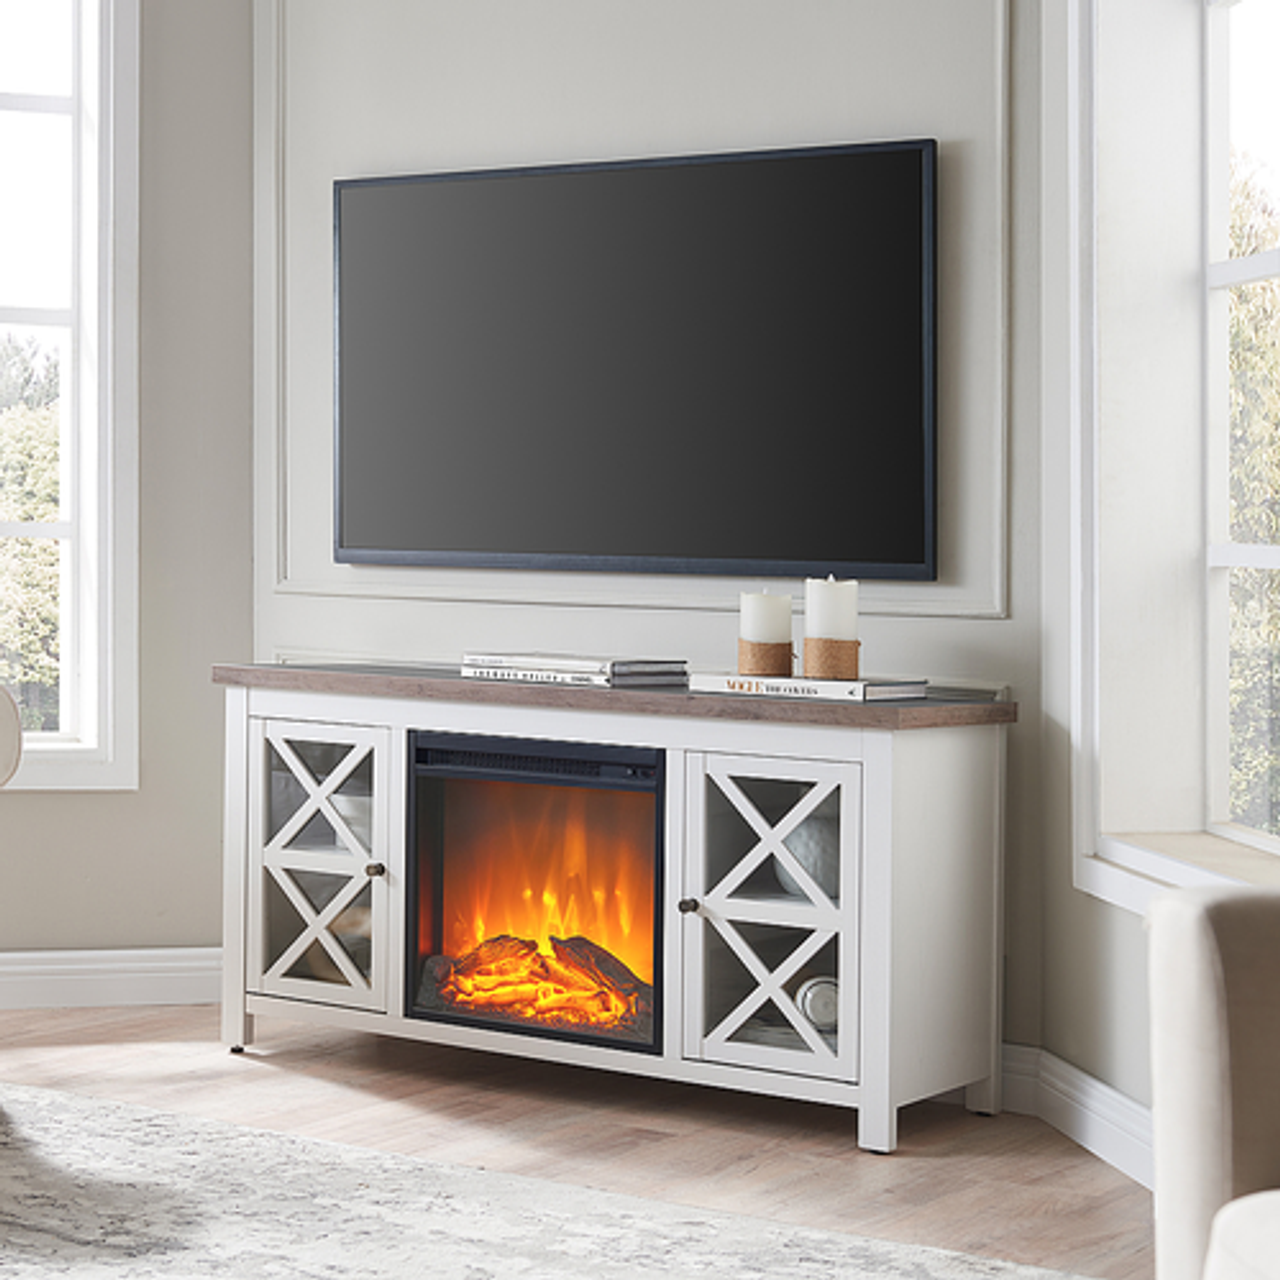 Camden&Wells - Colton Log Fireplace TV Stand for TVs up to 55" - White/Gray Oak